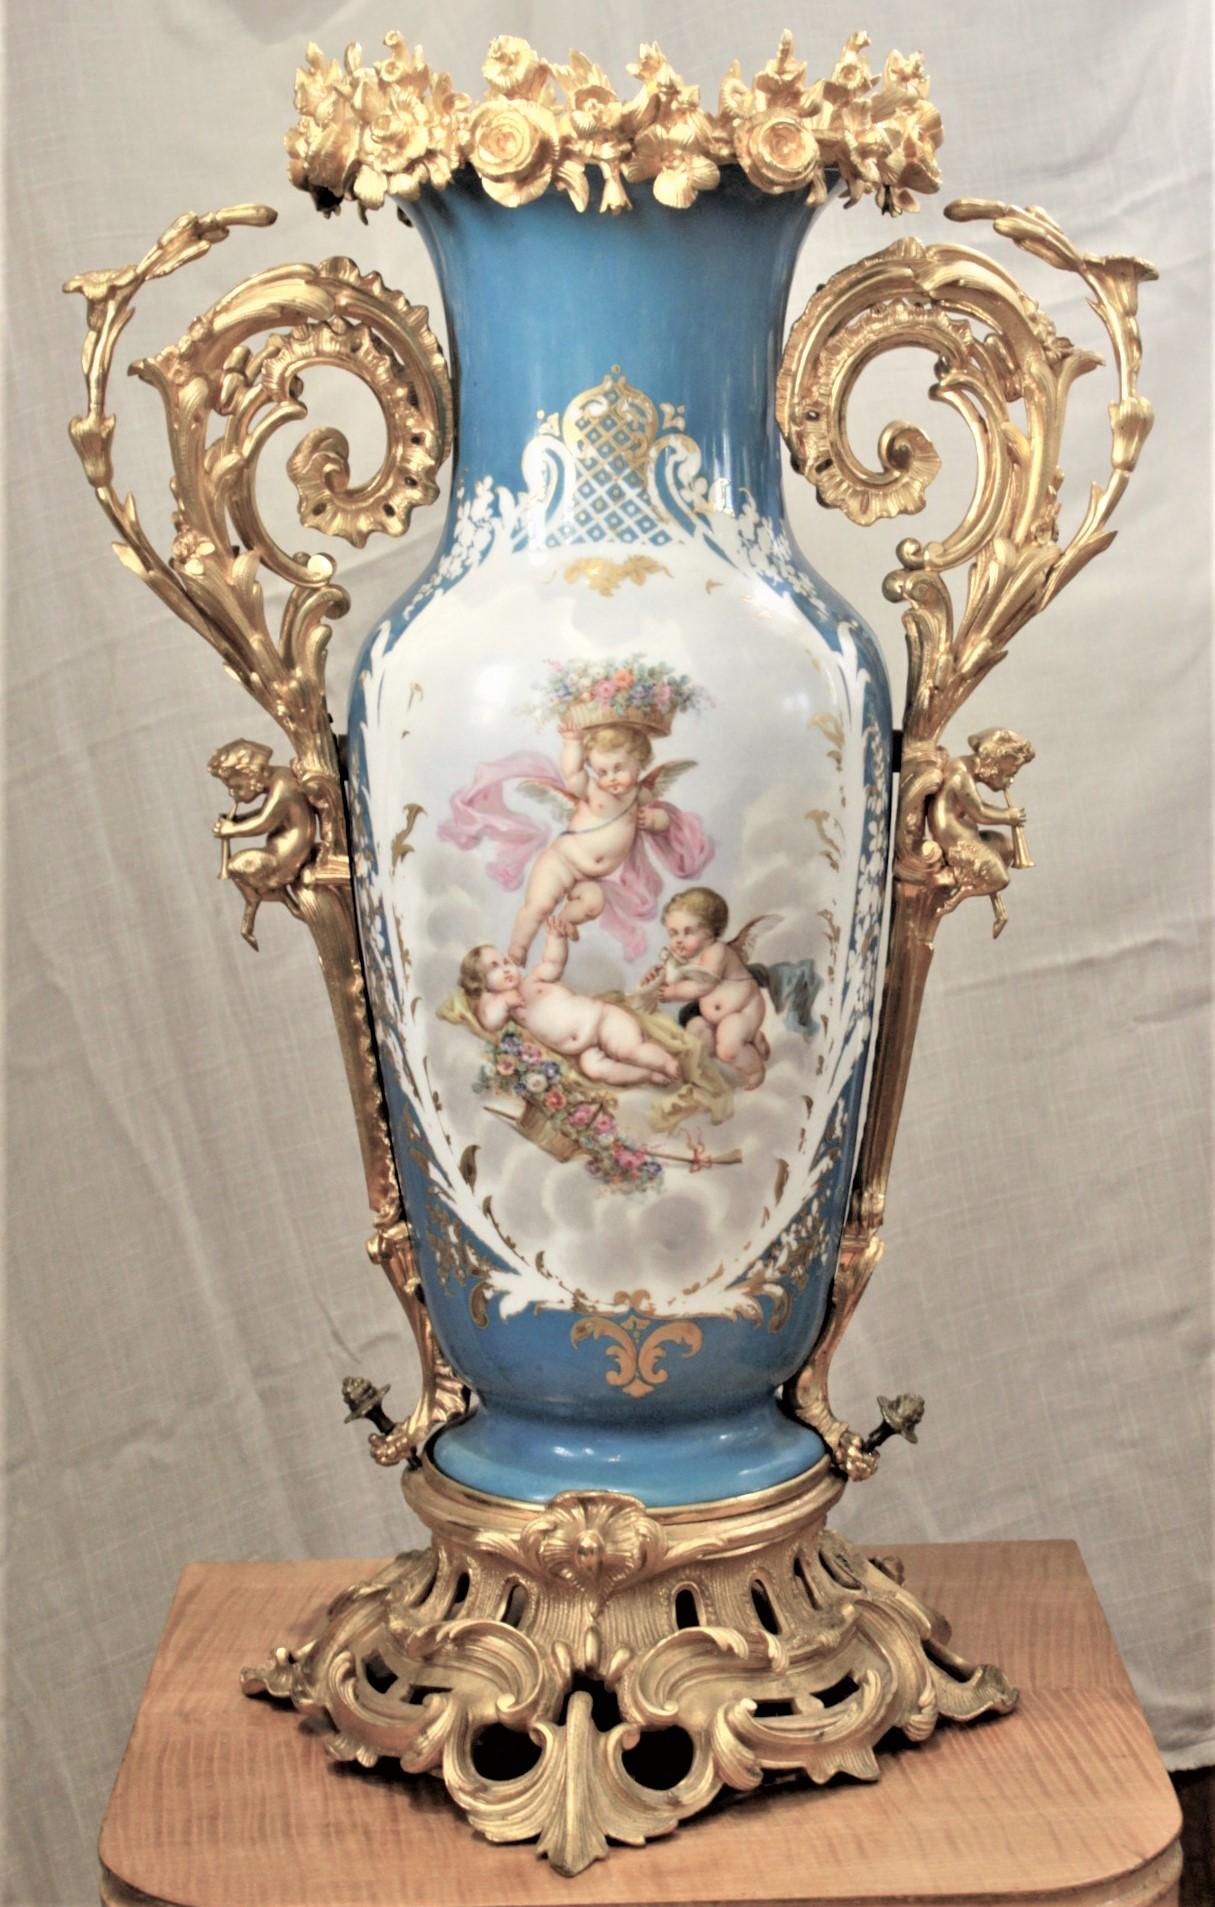 This quite large and substantial antique hand-painted porcelain vase is unsigned, but presumed to have been made in France in approximately 1880 in the Sevres style. The vase is done with a turquoise blue ground with well executed hand-painted